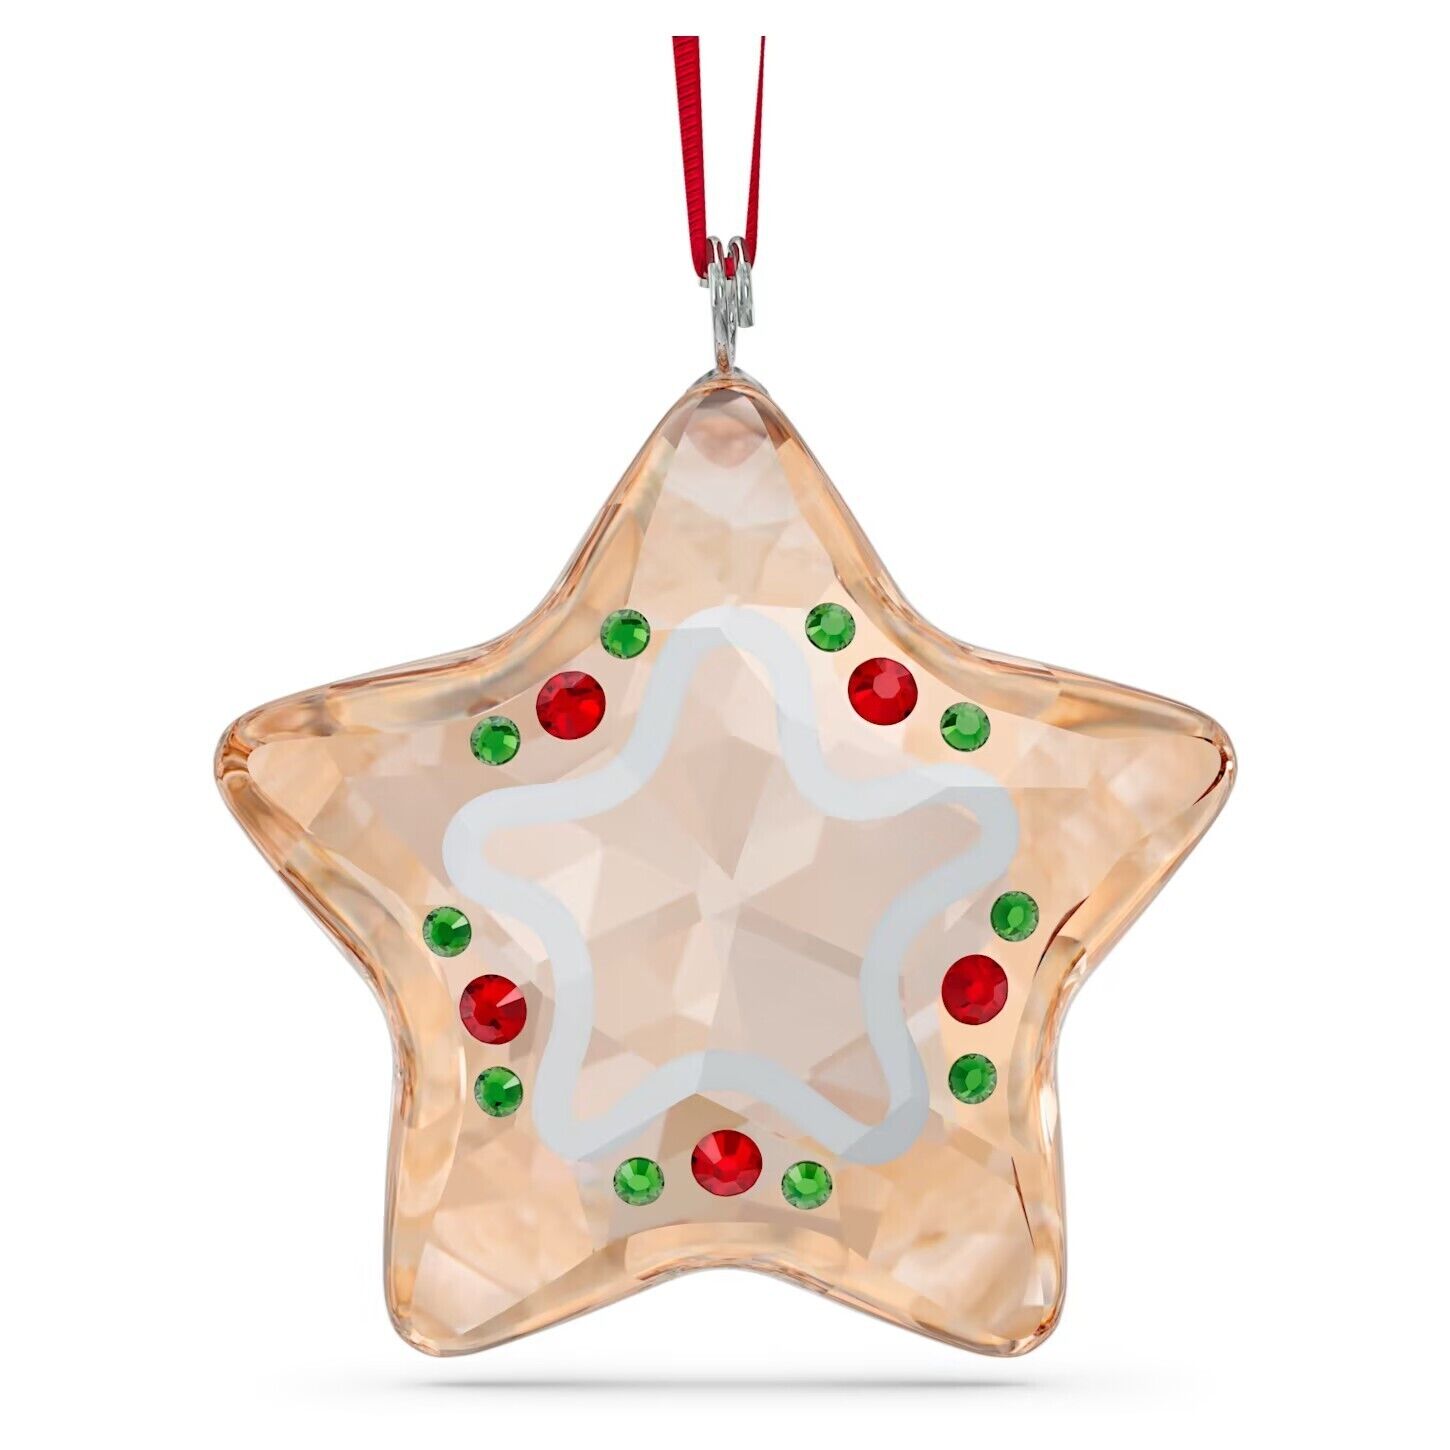 Swarovski Crystal Holiday Cheers Gingerbread Star Ornament, Multicolored 5627610